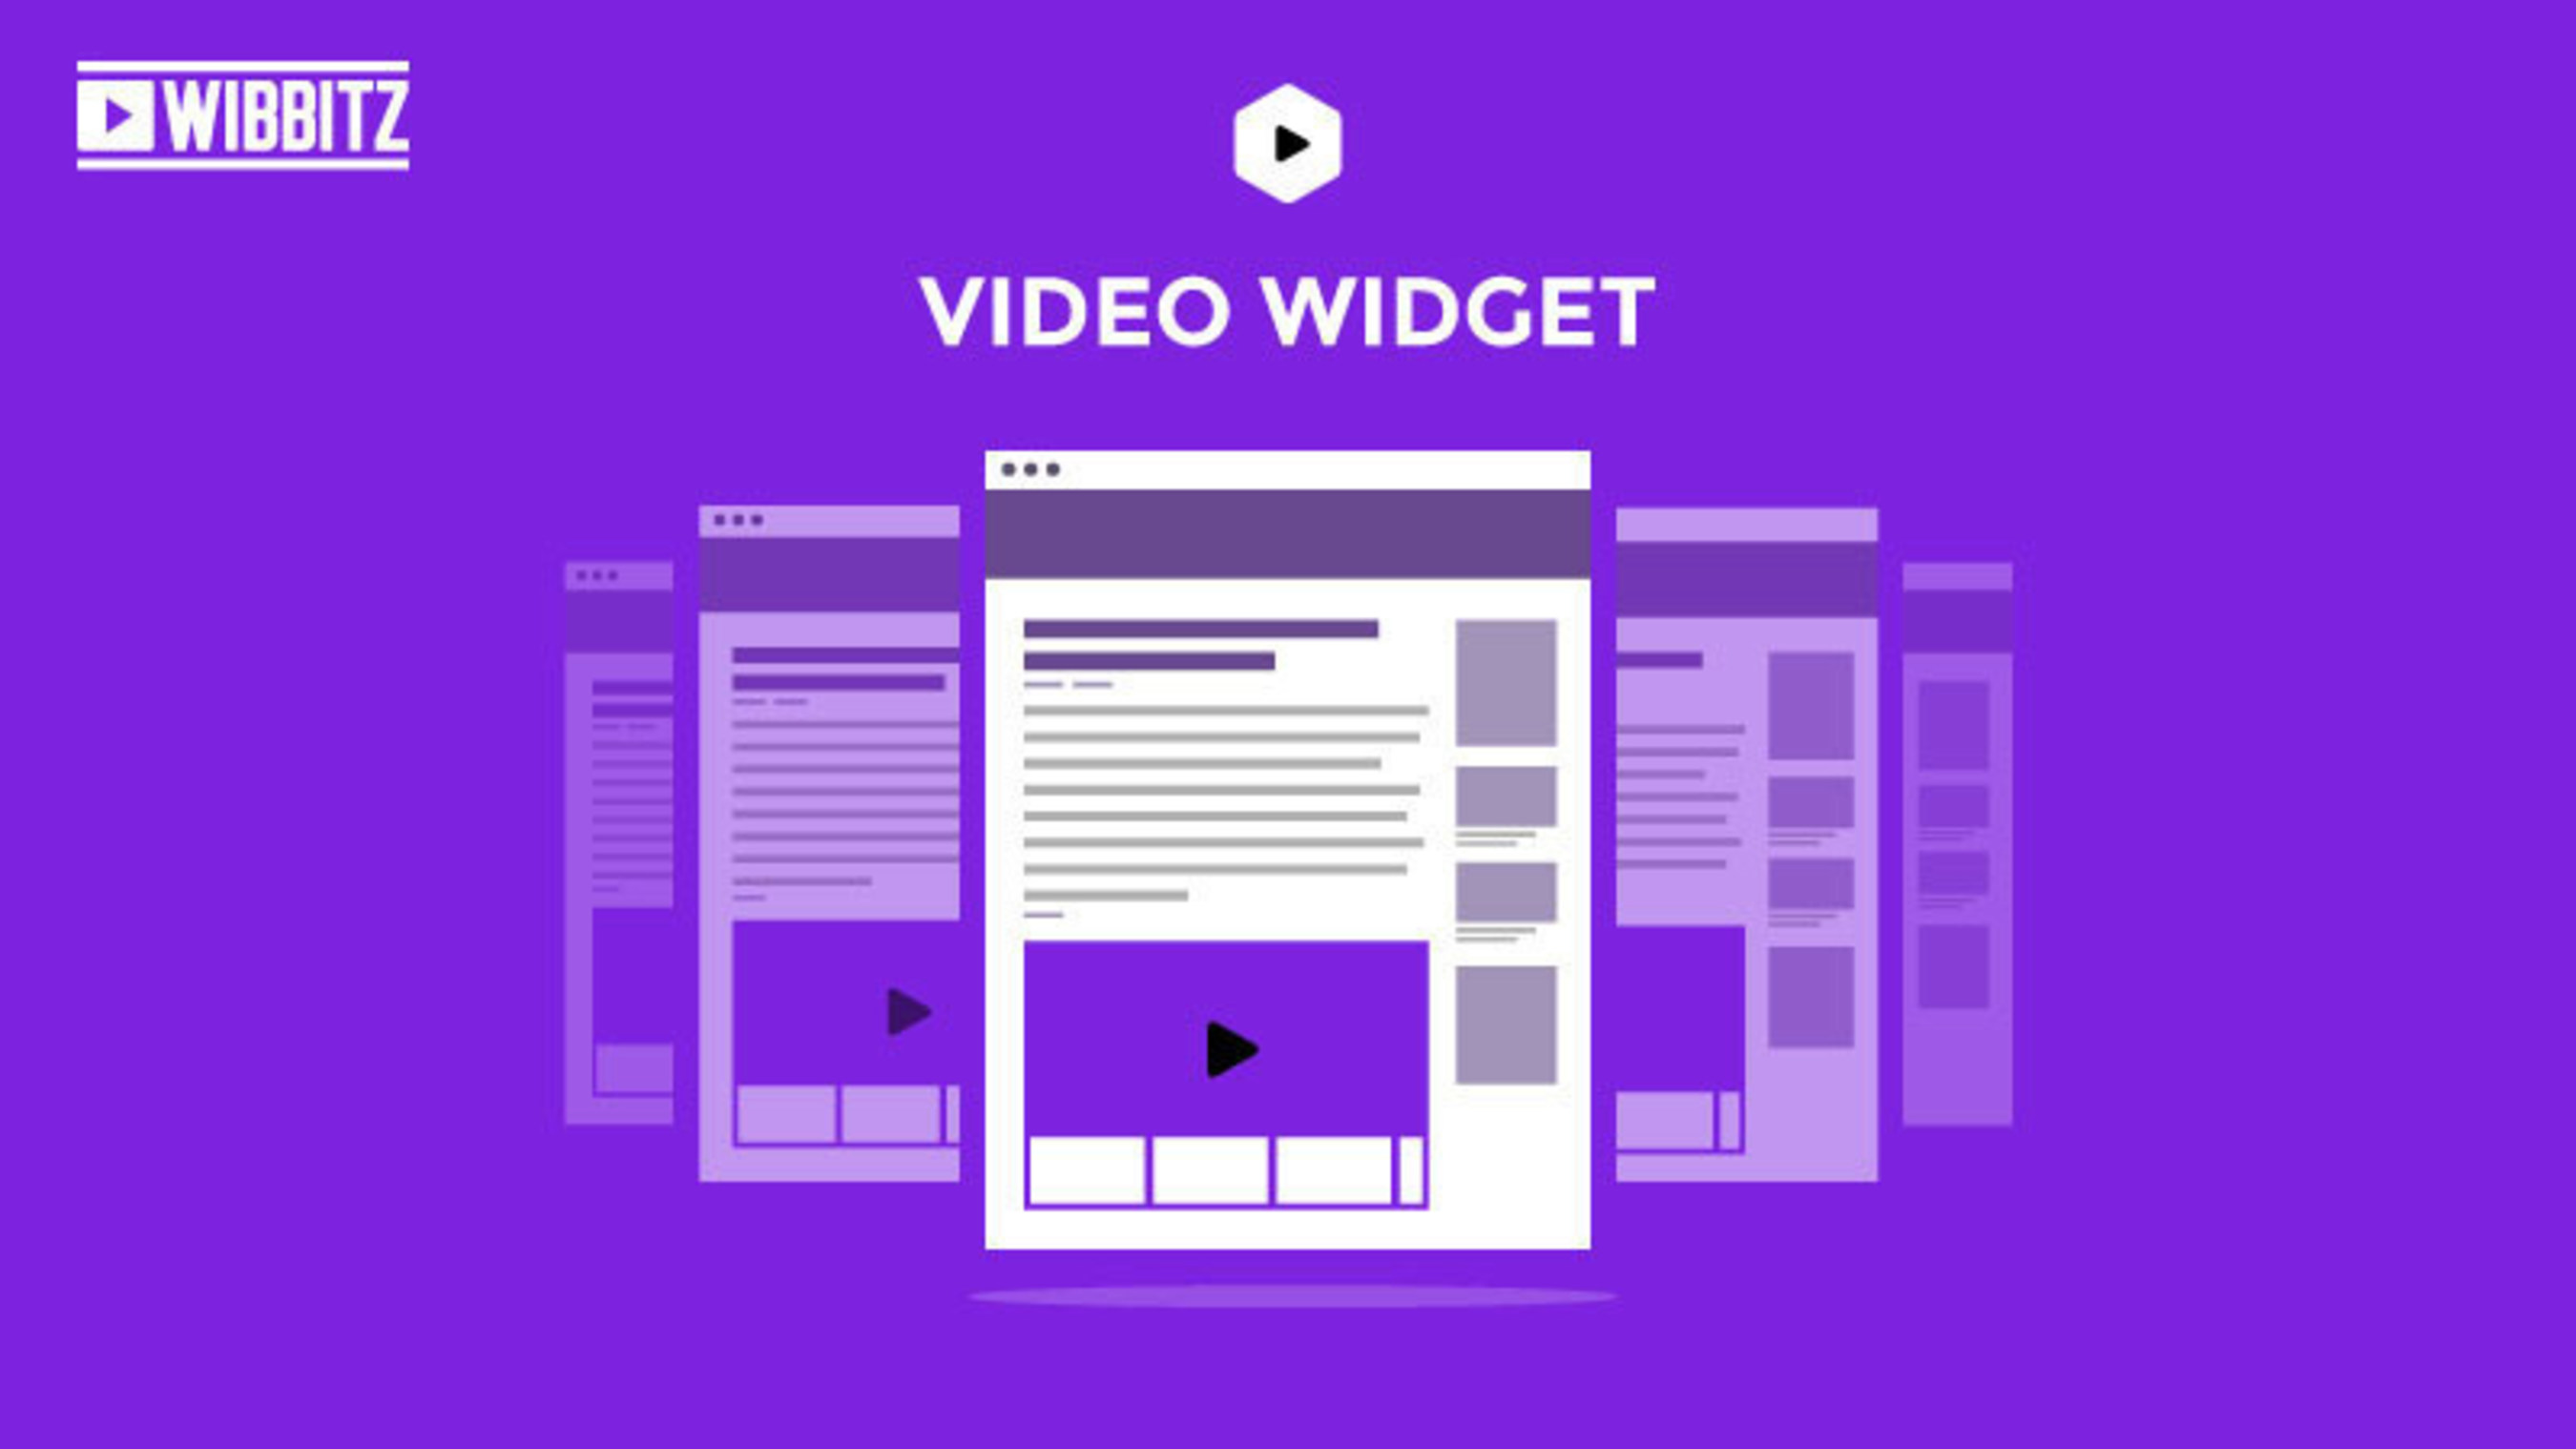 The Wibbitz Widget video players empower publishers to enhance their content and expand revenues across desktop and mobile sites.